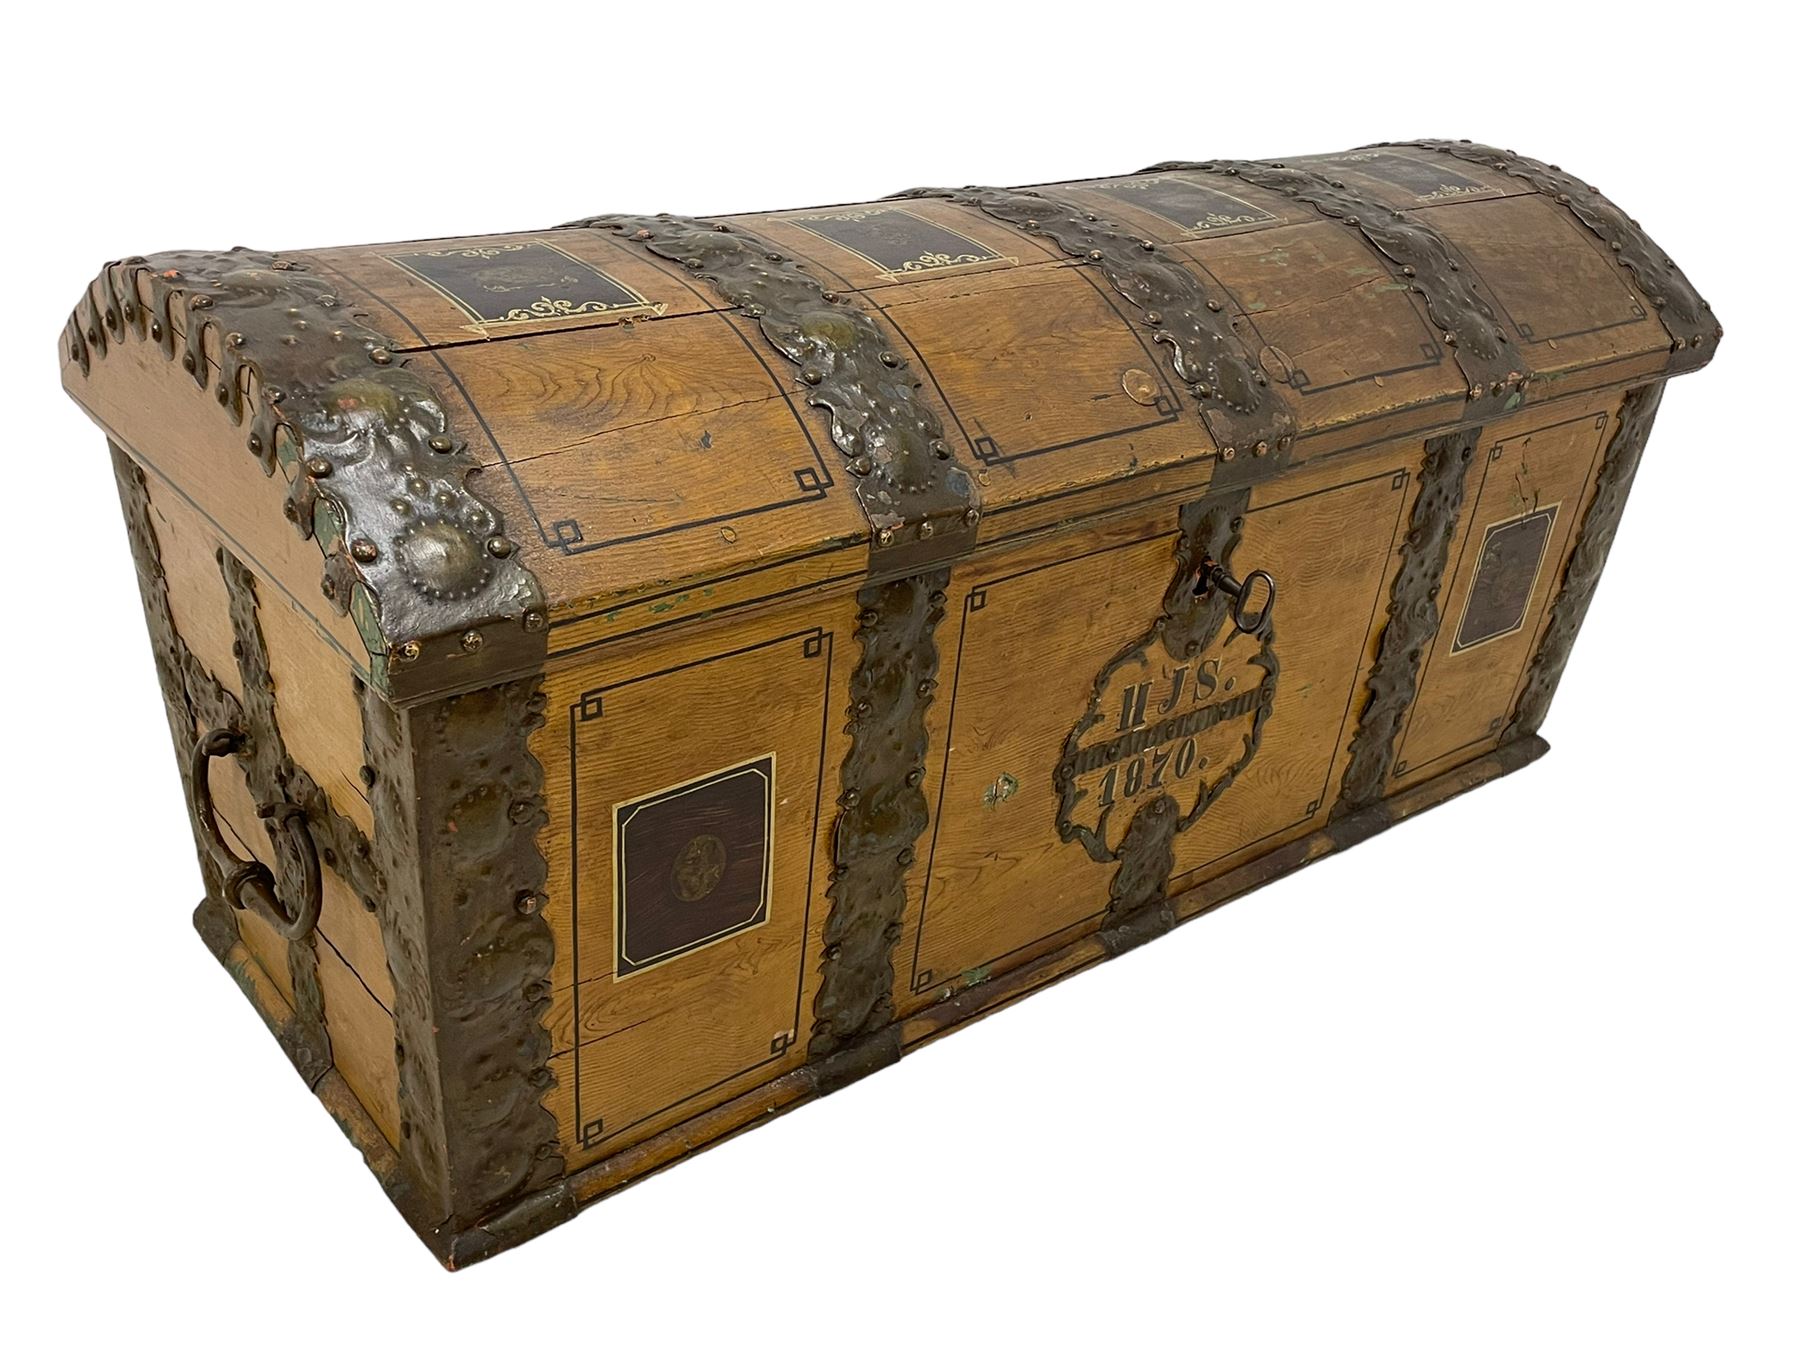 19th century Northern European painted oak sea chest - Image 7 of 29